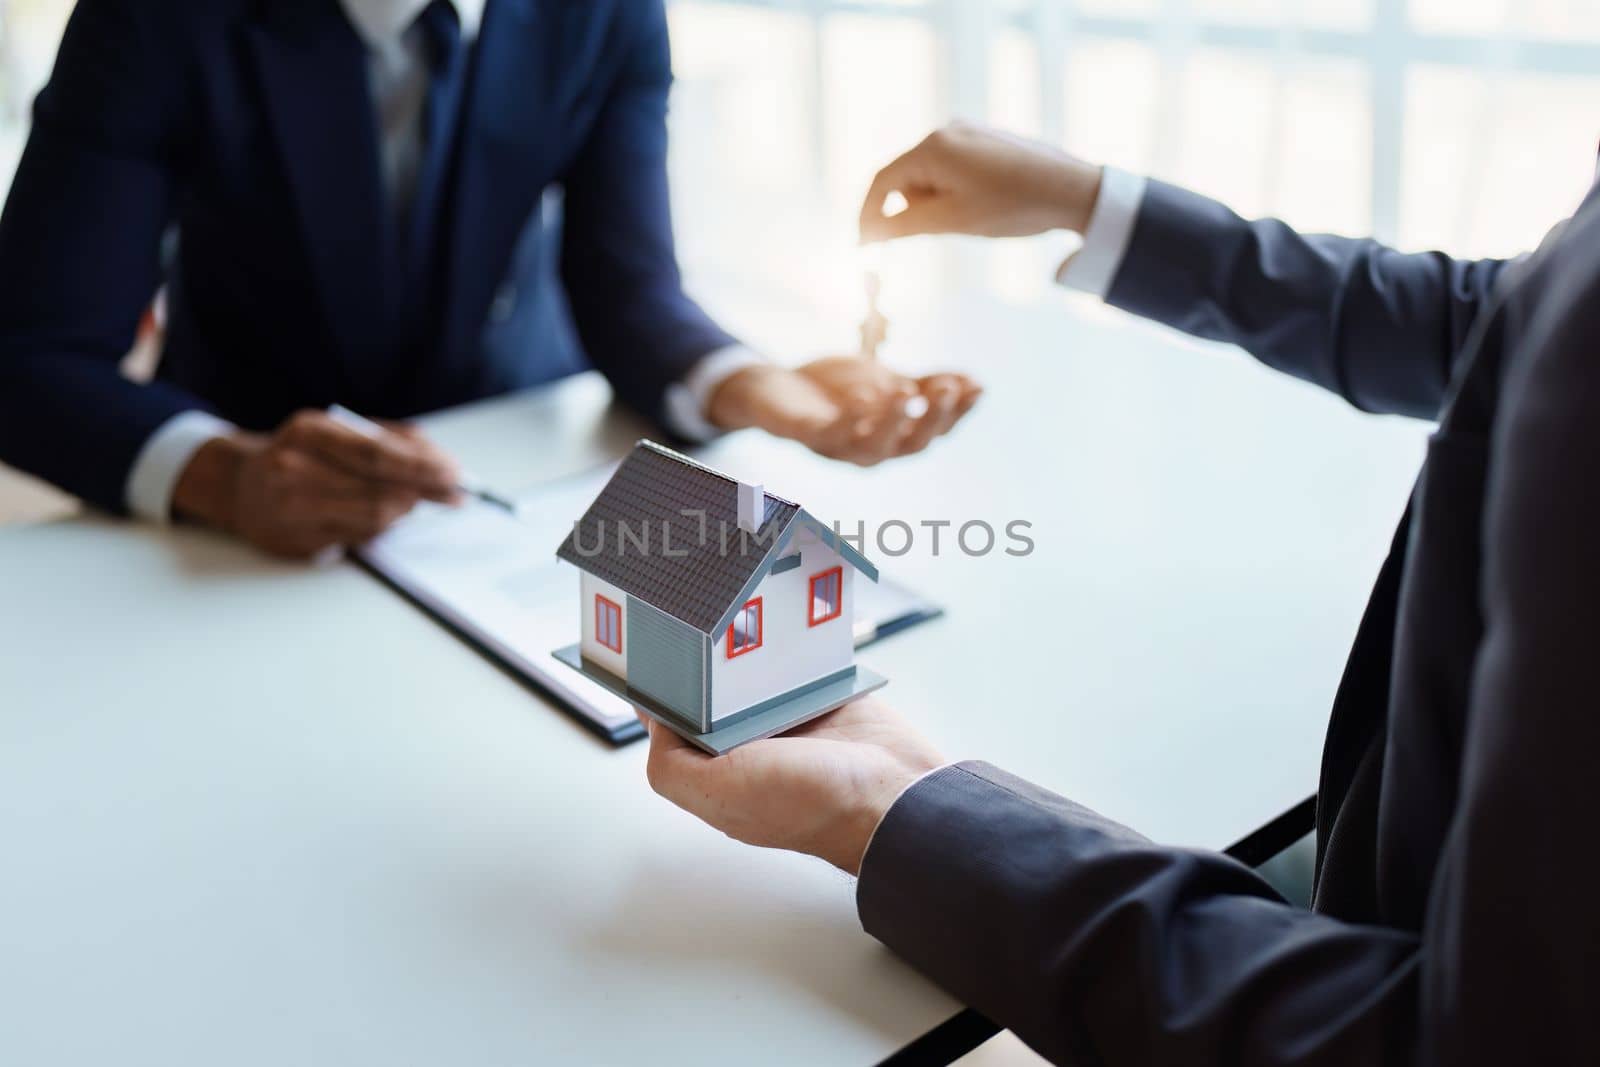 Real estate company to buy houses and land are delivering keys and houses to customers after agreeing to make a home purchase agreement and make a loan agreement. by Manastrong